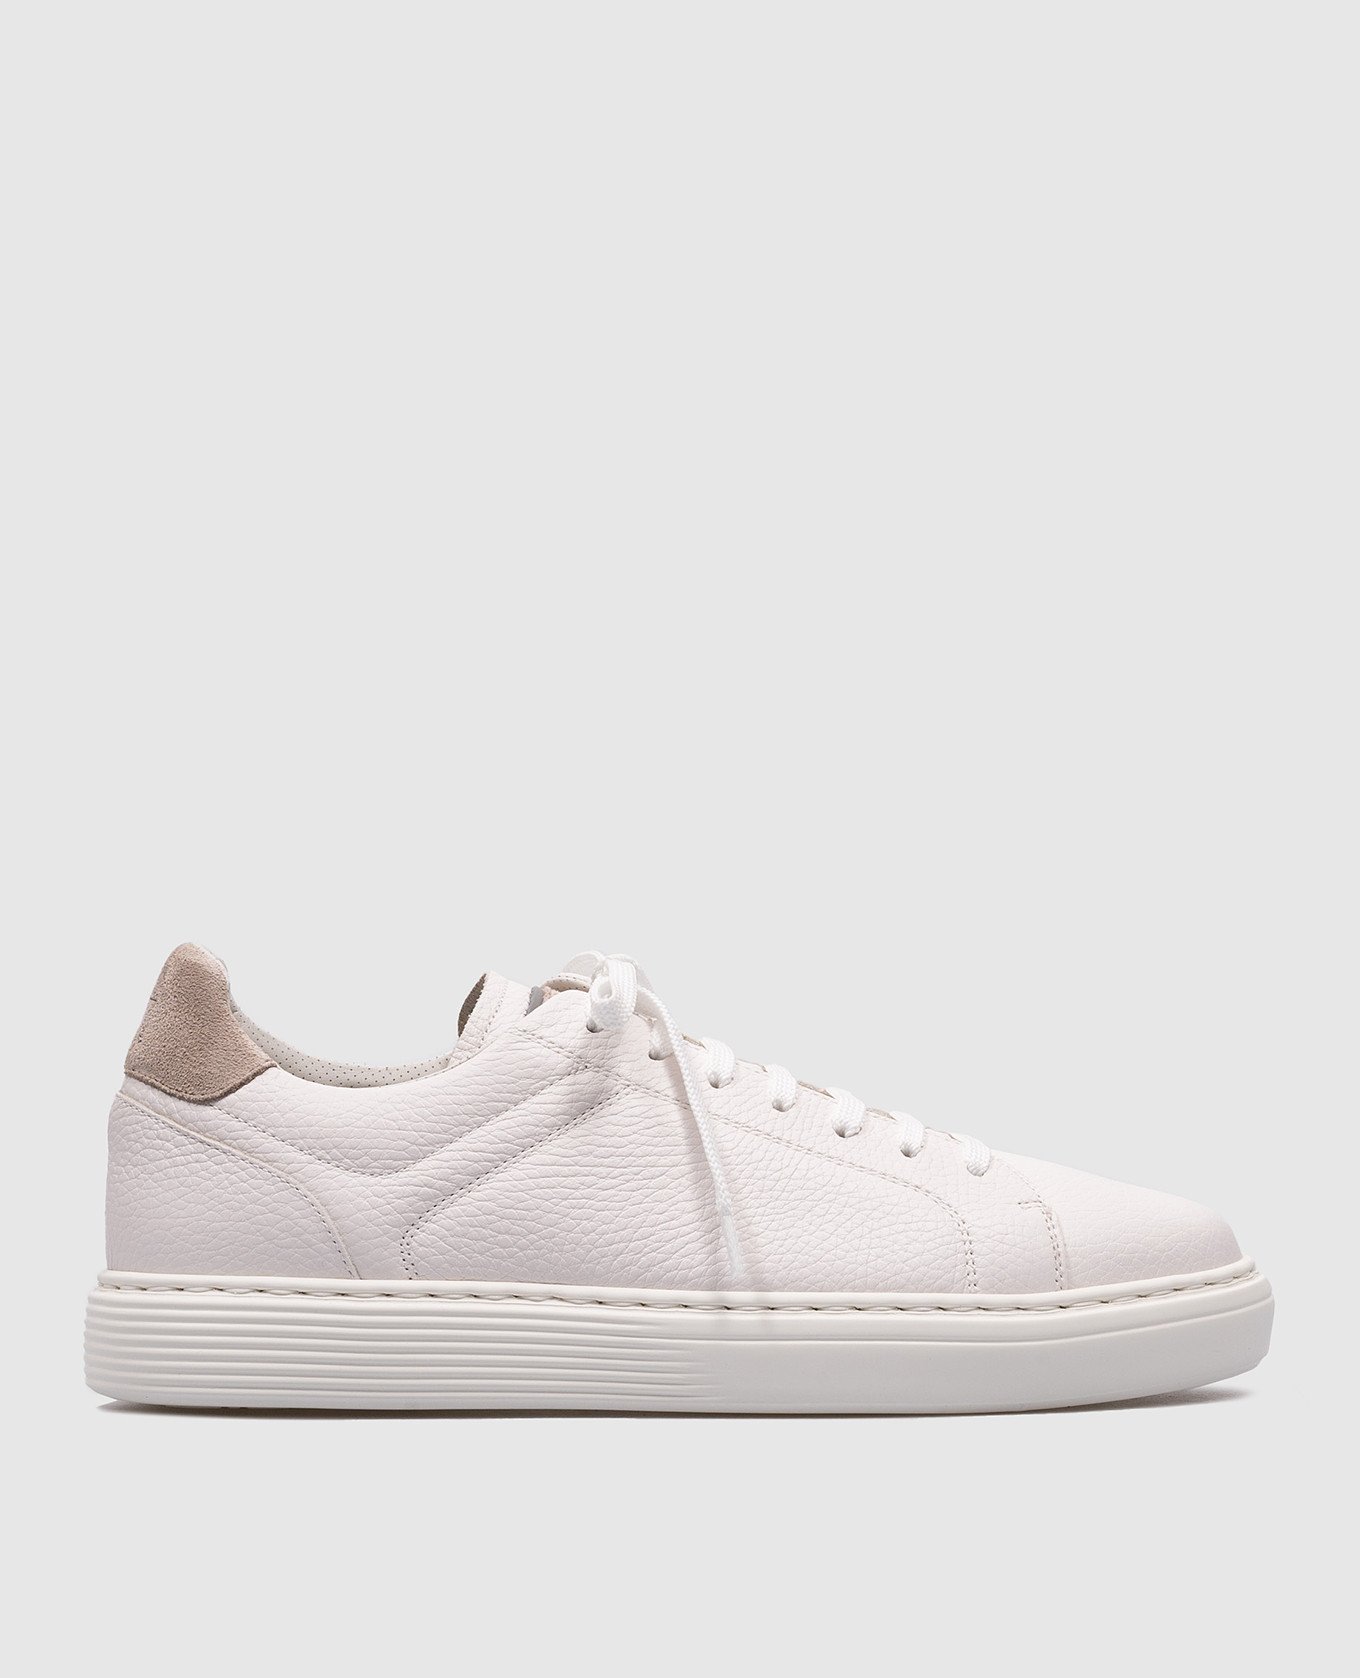 White leather sneakers with logo emblem